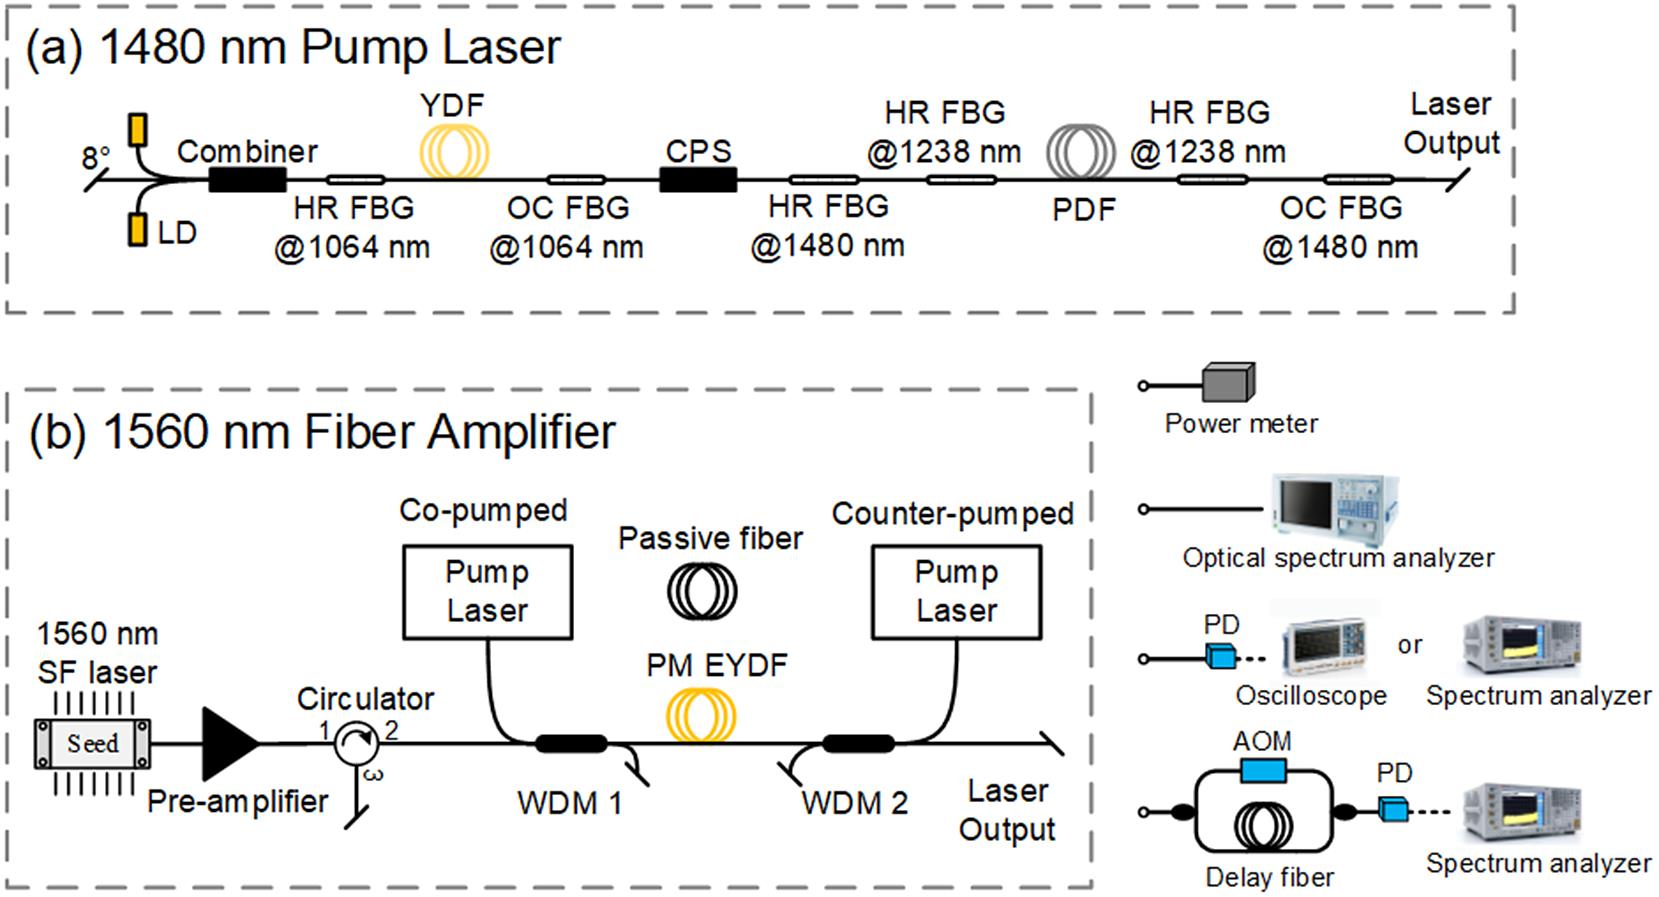 Schematic diagram of the single-frequency fiber amplifier and its measurement for power, spectrum, intensity dynamics and linewidth. LD, laser diode; YDF, ytterbium-doped fiber; HR-FBG, high-reflection fiber Bragg grating; OC FBG, output coupler fiber Bragg grating; CPS, cladding power stripper; PDF, phosphorous-doped single-mode fiber; SF, single-frequency; WDM, wavelength division multiplexer; PM EYDF, polarization-maintaining erbium-ytterbium co-doped fiber; PD, photodetector; AOM, acousto-optic modulator.